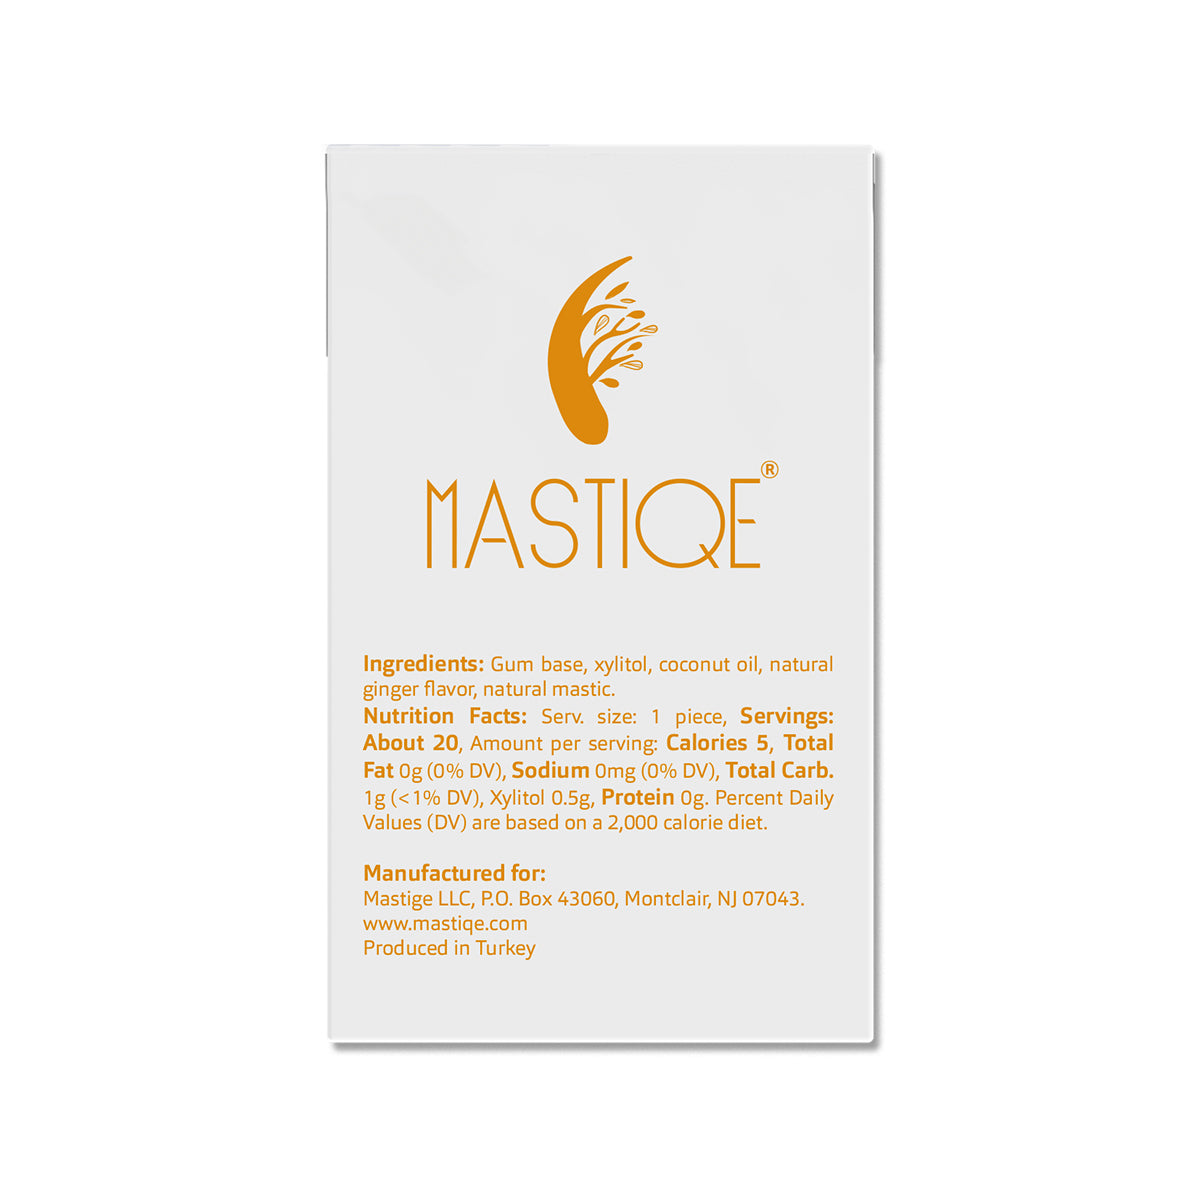 All New! Mastiqe Hard Chewing Gum with Natural Mastic, Ginger (20-Pack)